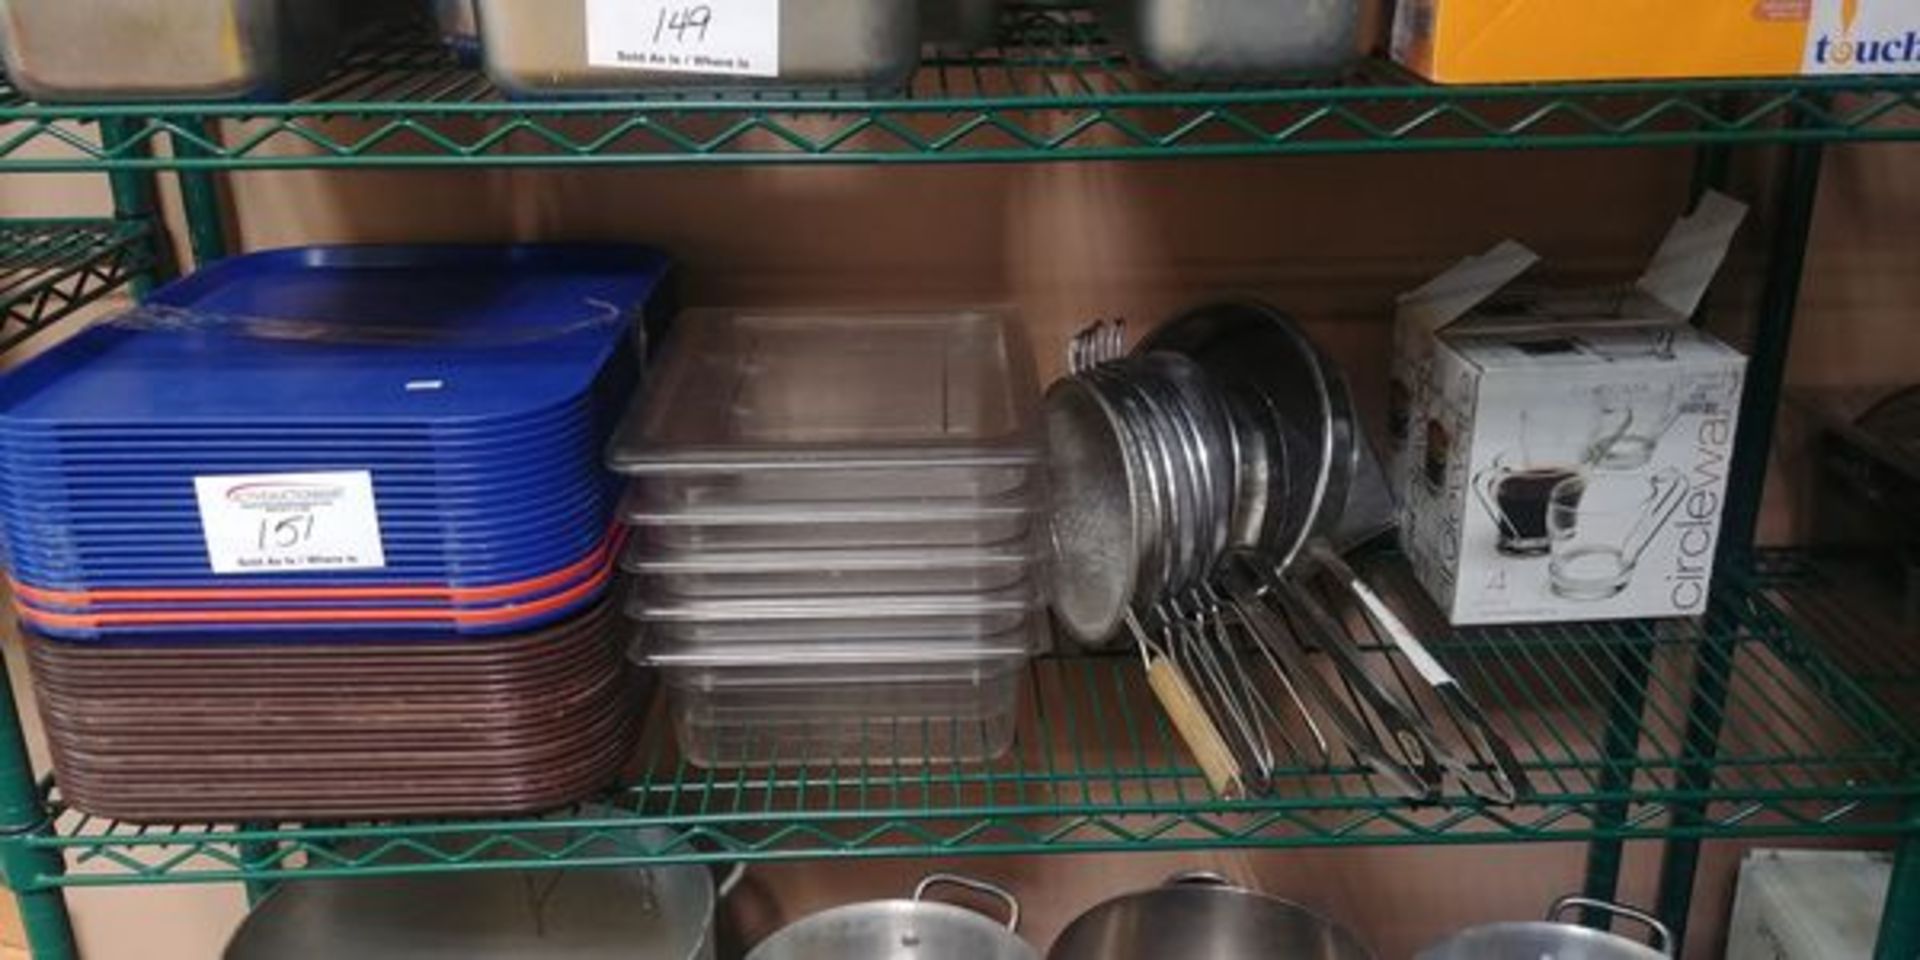 Shelf Lot of Misc. Serving Trays, Plastic Inserts, 7 Strainers and 2 Boxes of Coffee Cups